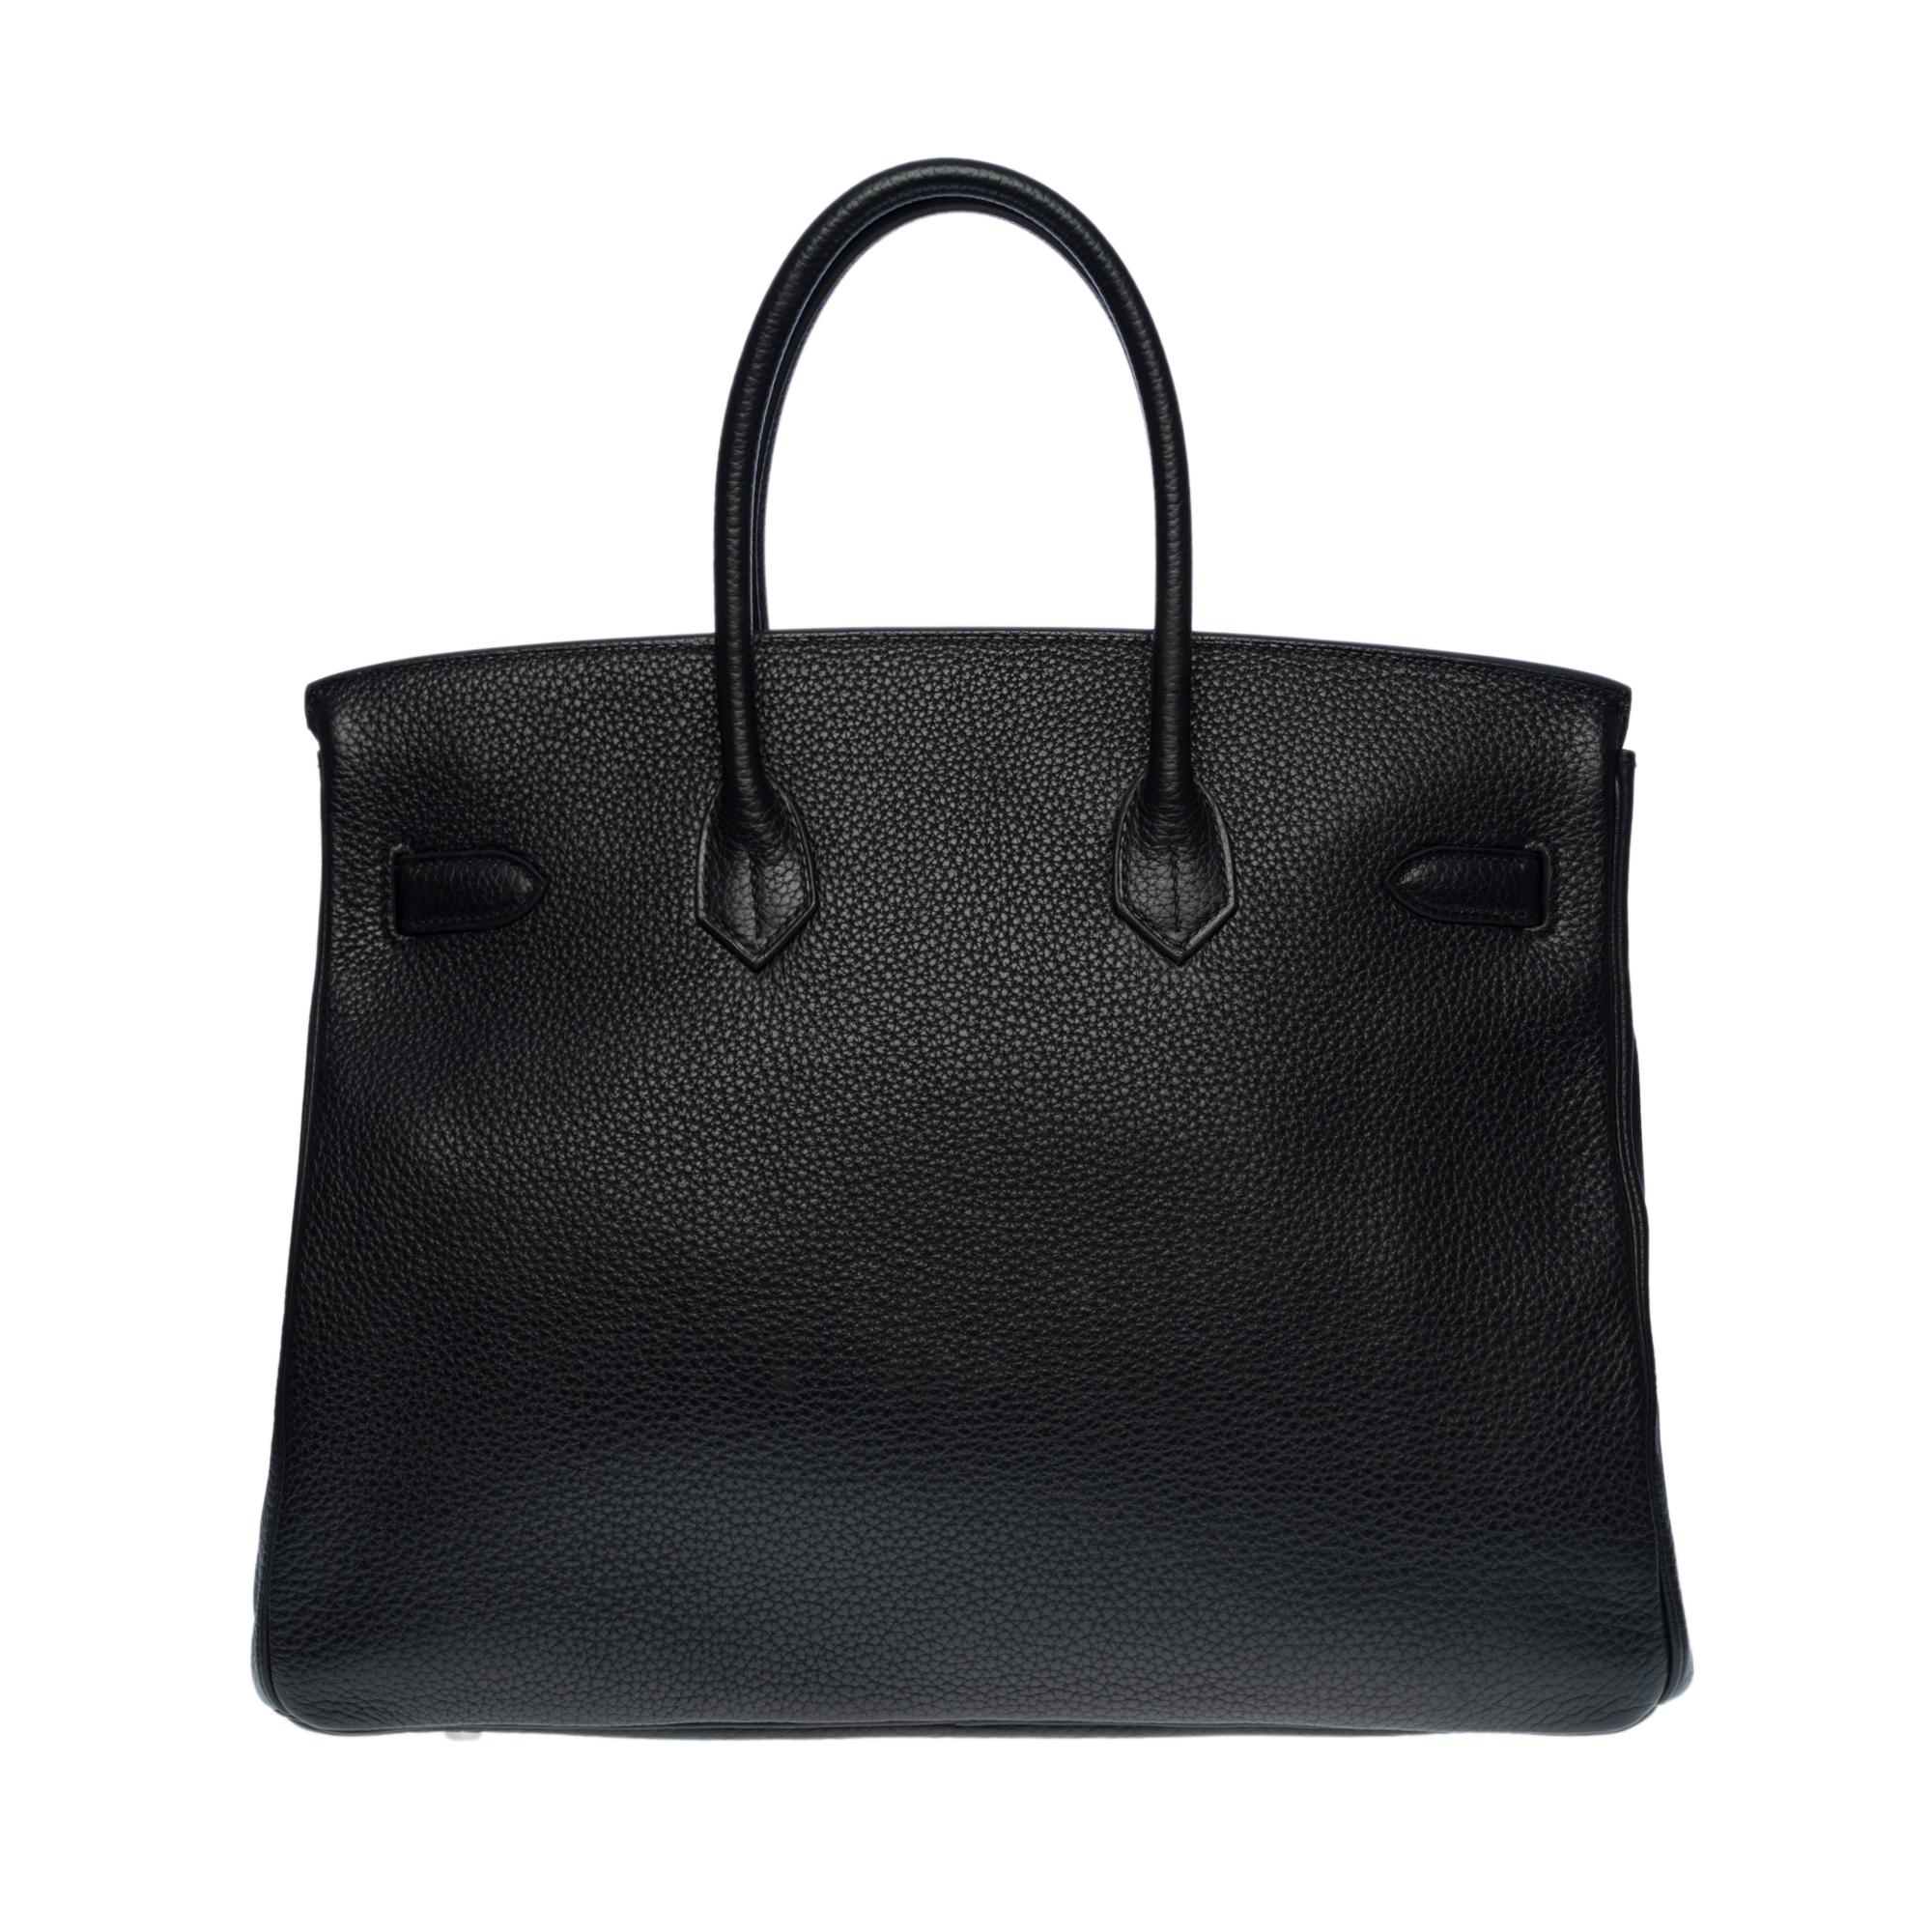 Splendid Hermes Birkin handbag 35 cm in black Togo leather, palladium silver metal hardware, double black leather handle allowing a hand-carried

Flap closure
Black leather lining, one zippered pocket, one patch pocket
Signature: 